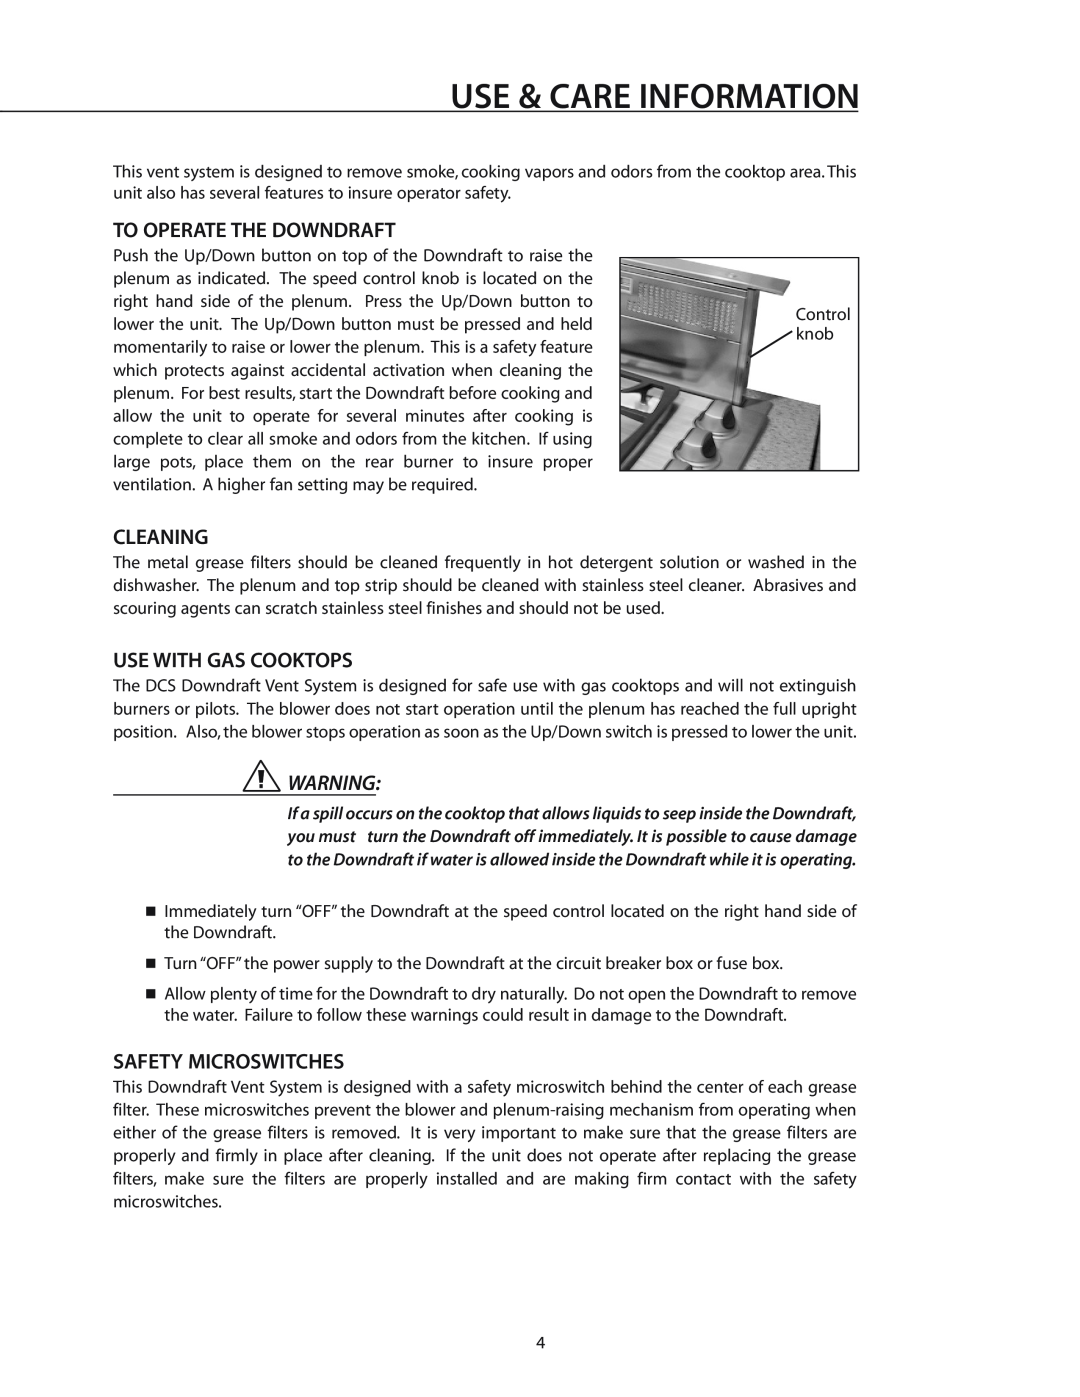 DCS DD-36SS manual Use & Care Information, To Operate The Downdraft, Cleaning, Use With Gas Cooktops, Safety Microswitches 